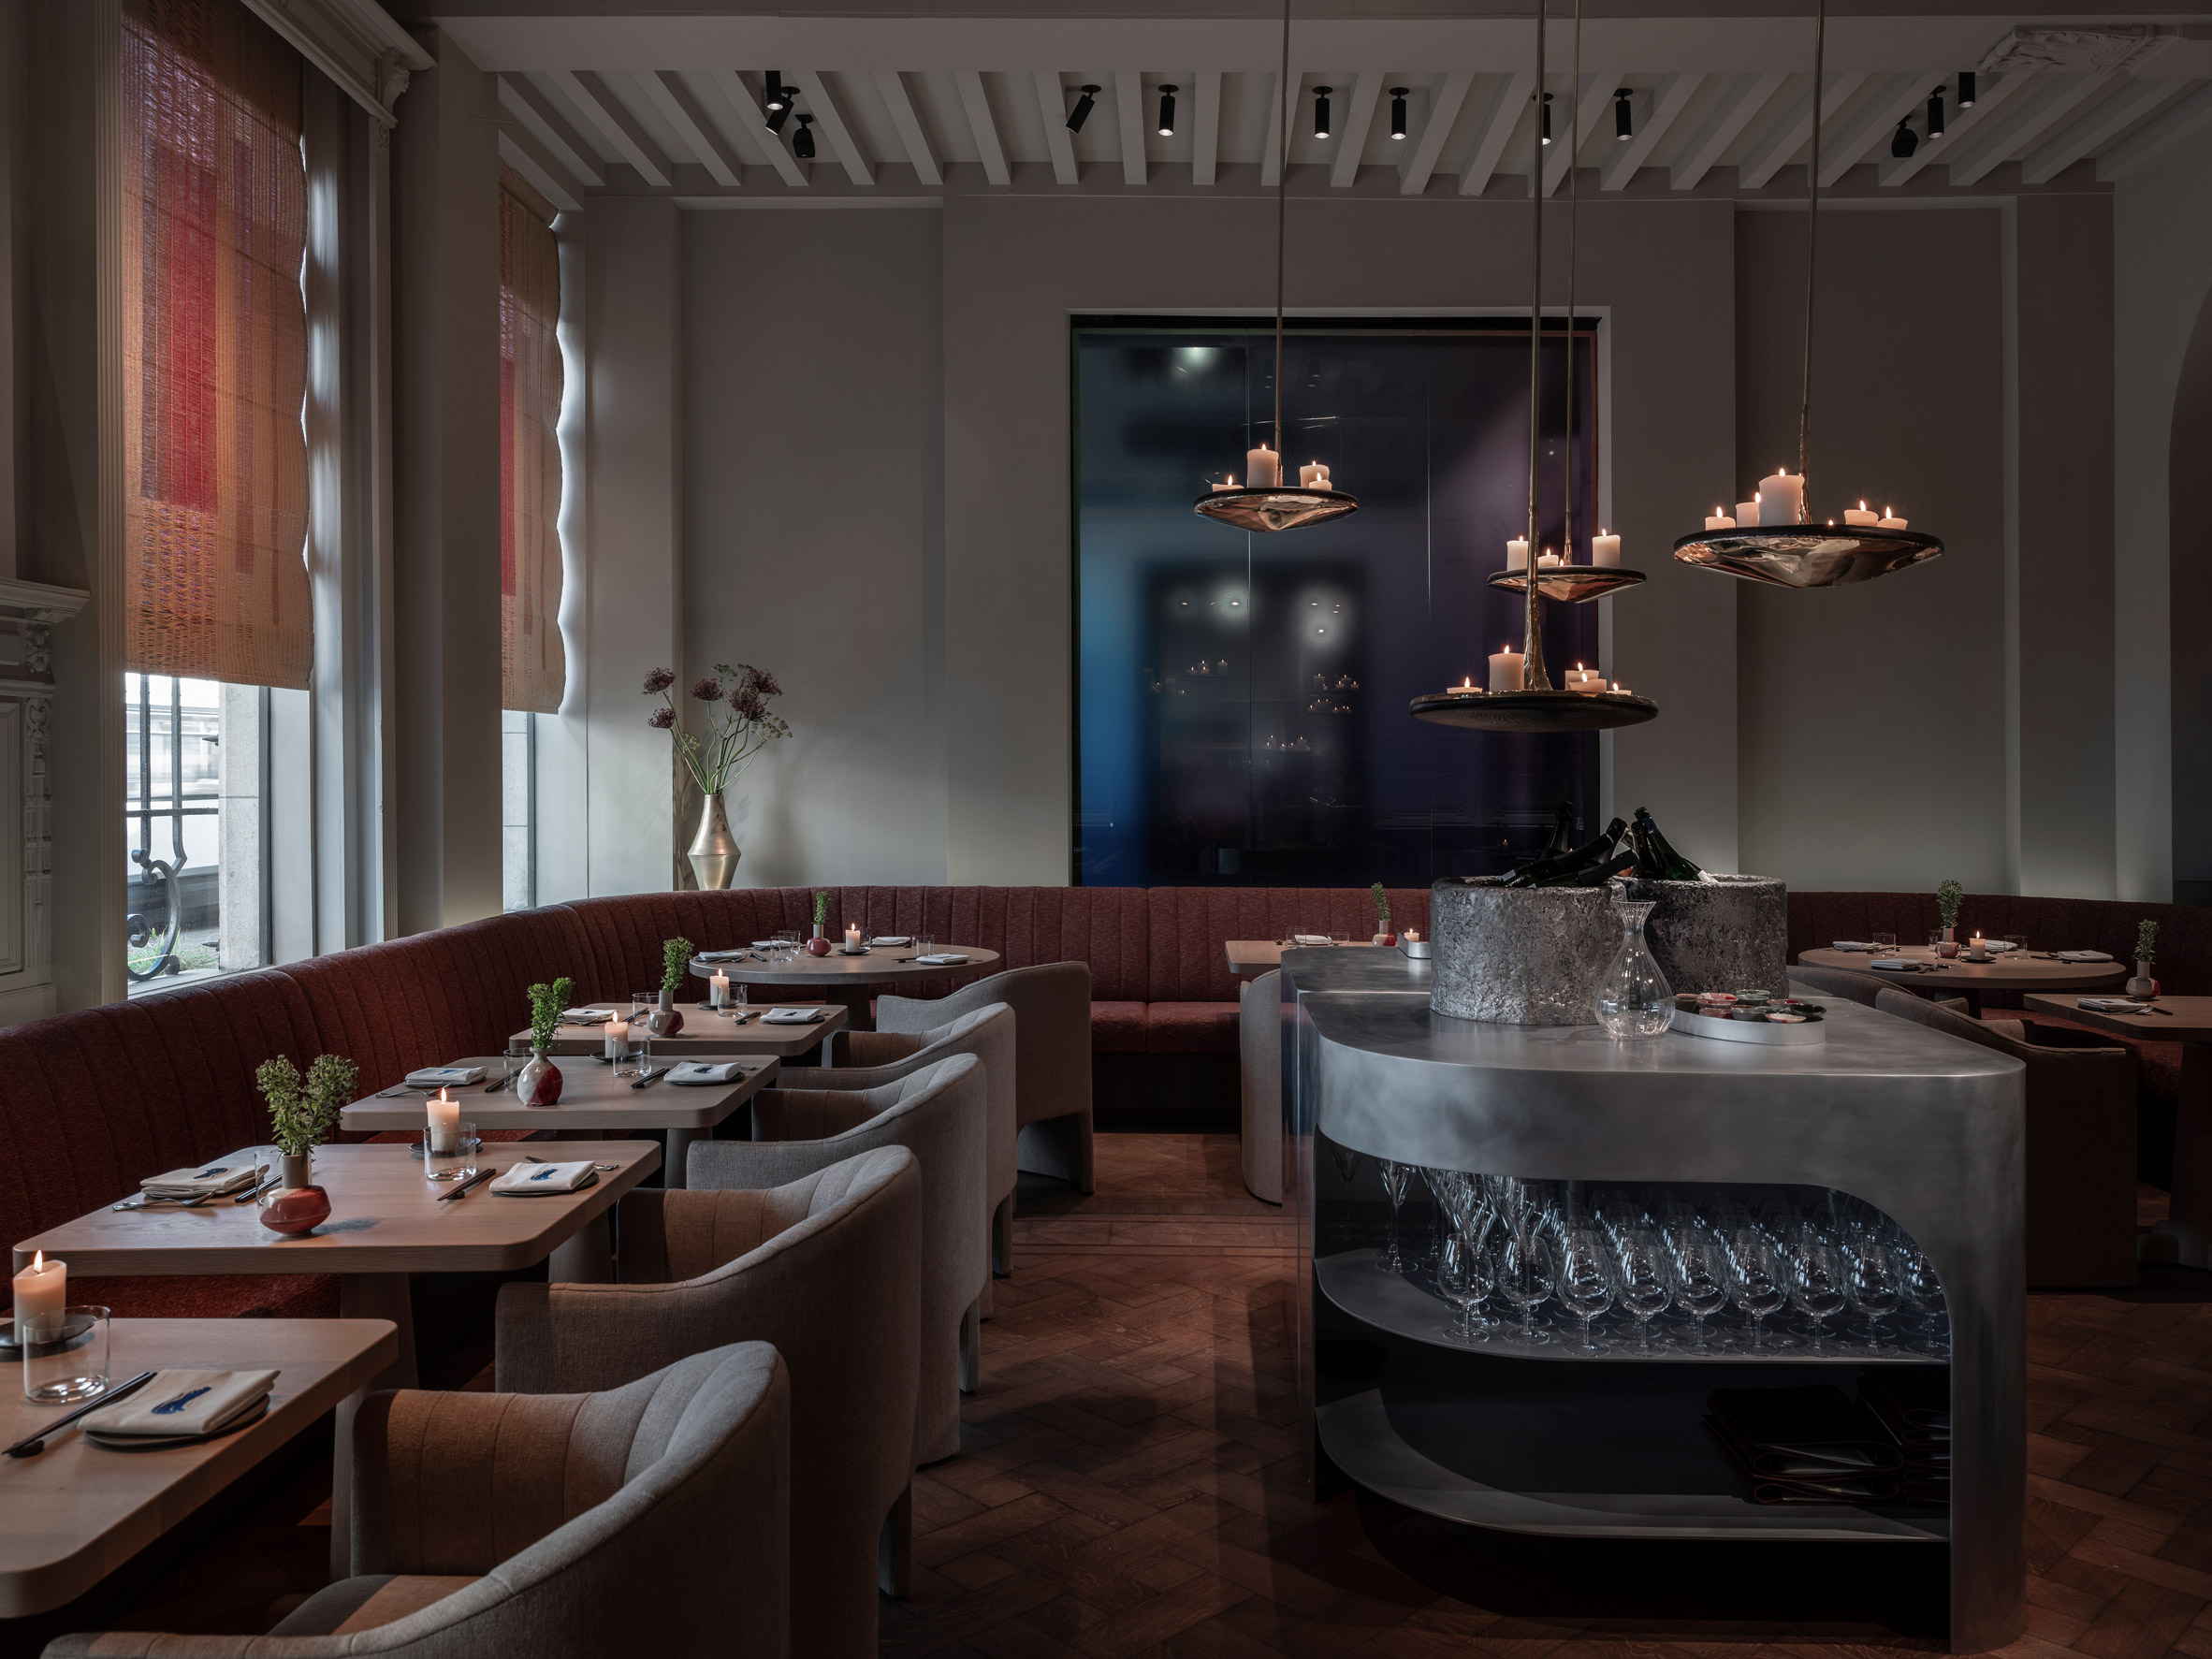 Dimly lit restaurant with fabric-coated seating and hanging candles